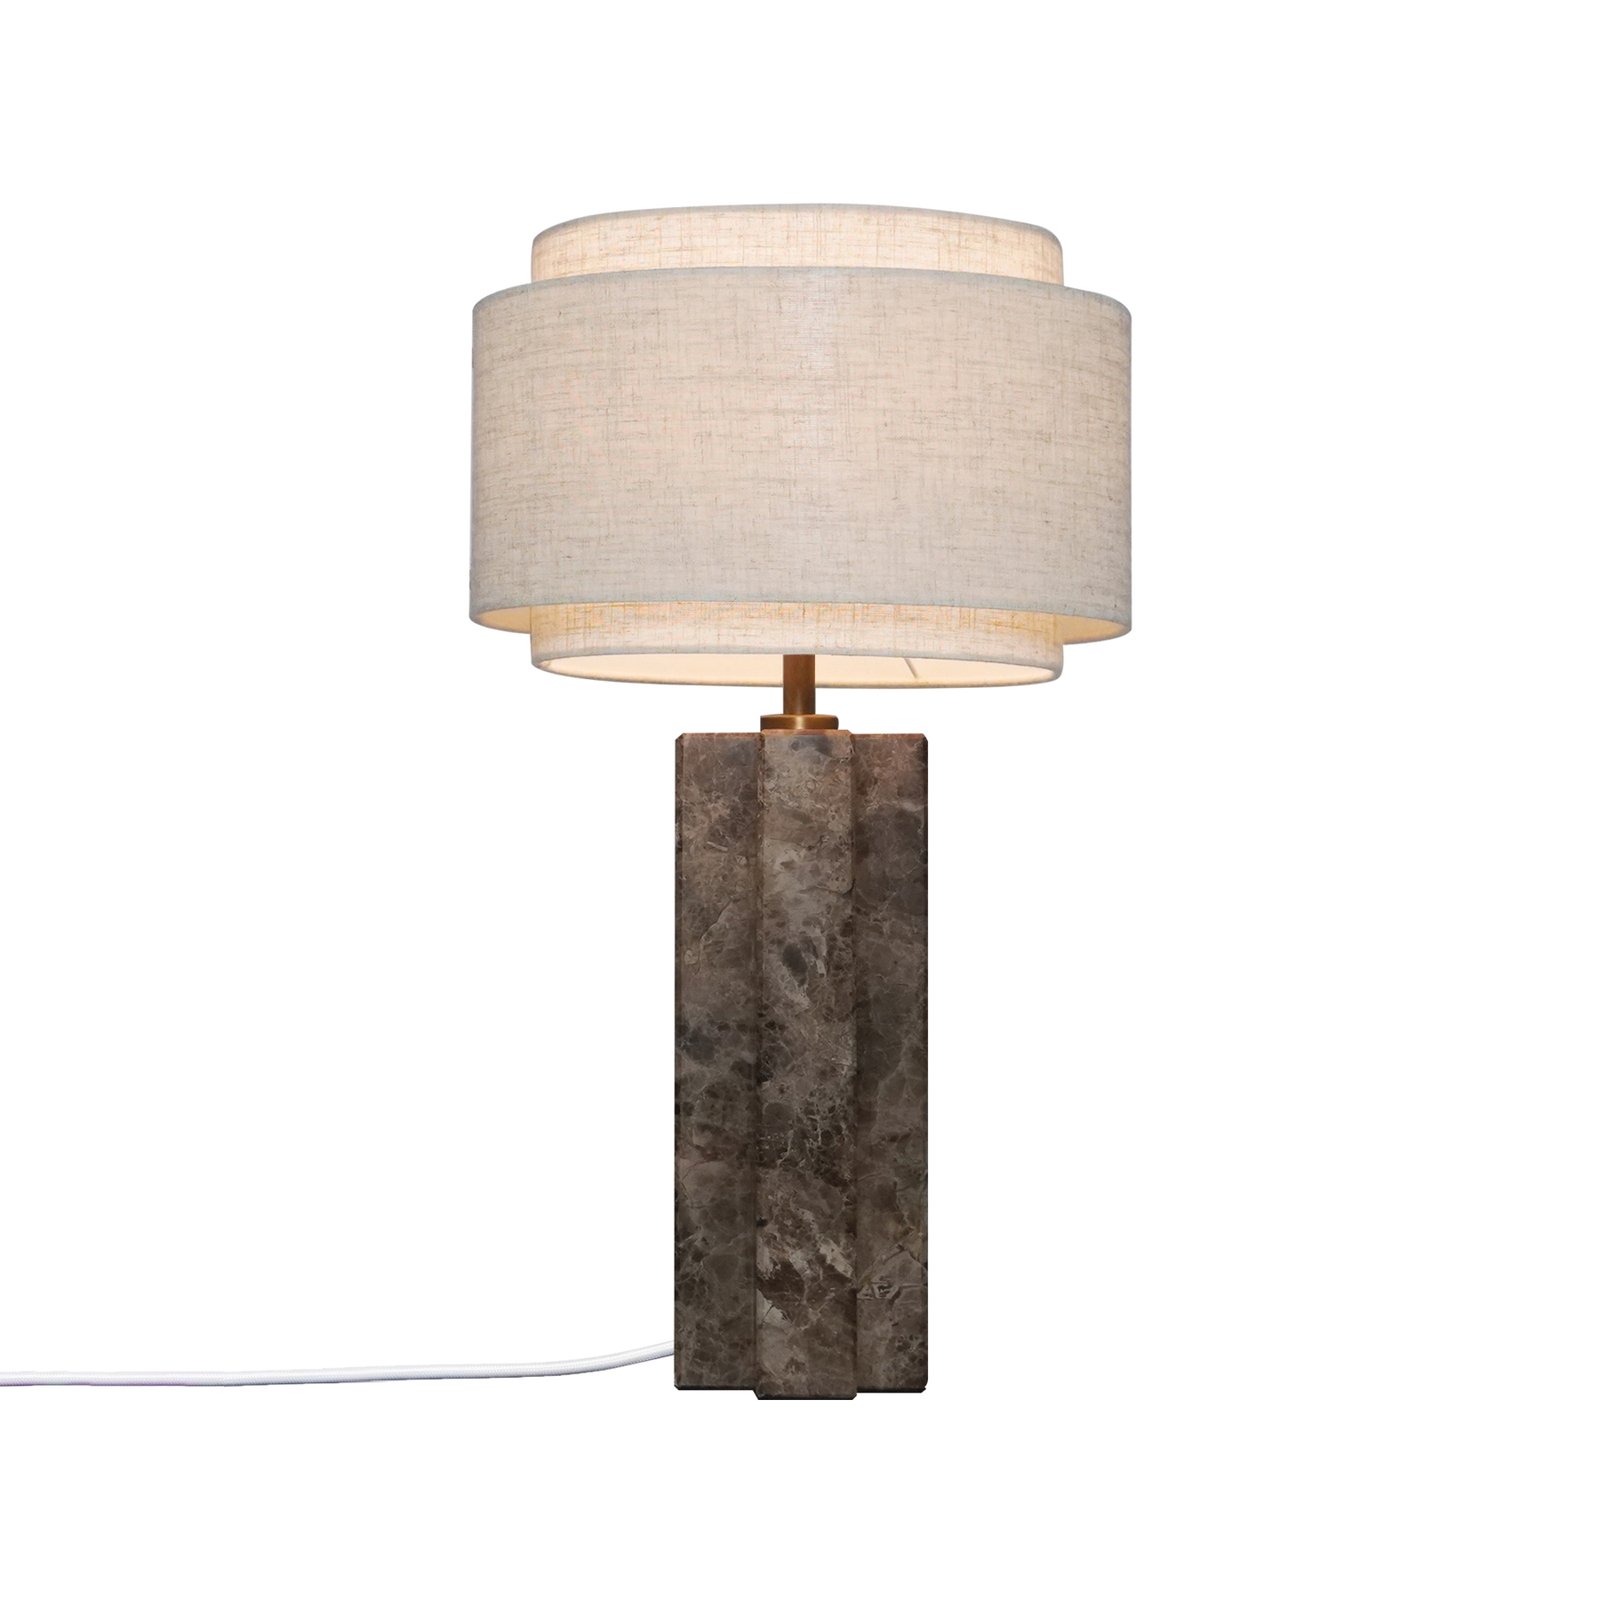 Takai table lamp made of fabric and marble